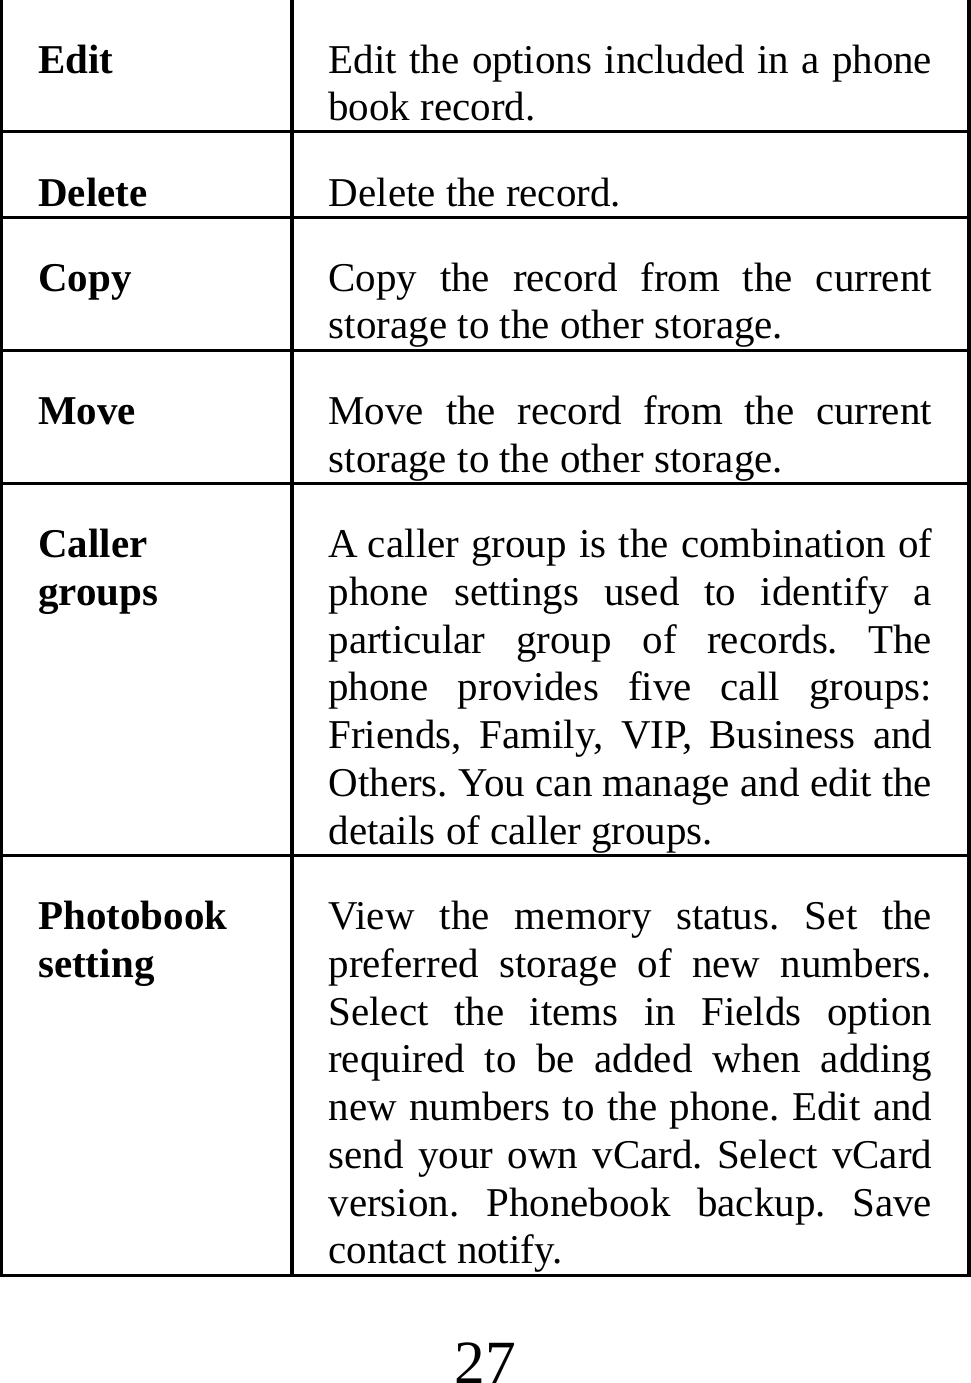  27 Edit  Edit the options included in a phone book record. Delete Delete the record. Copy  Copy the record from the current storage to the other storage. Move  Move the record from the current storage to the other storage. Caller groups  A caller group is the combination of phone settings used to identify a particular group of records. The phone provides five call groups: Friends, Family, VIP, Business and Others. You can manage and edit the details of caller groups. Photobook setting  View the memory status. Set the preferred storage of new numbers. Select the items in Fields option required to be added when adding new numbers to the phone. Edit and send your own vCard. Select vCard version. Phonebook backup. Save contact notify. 